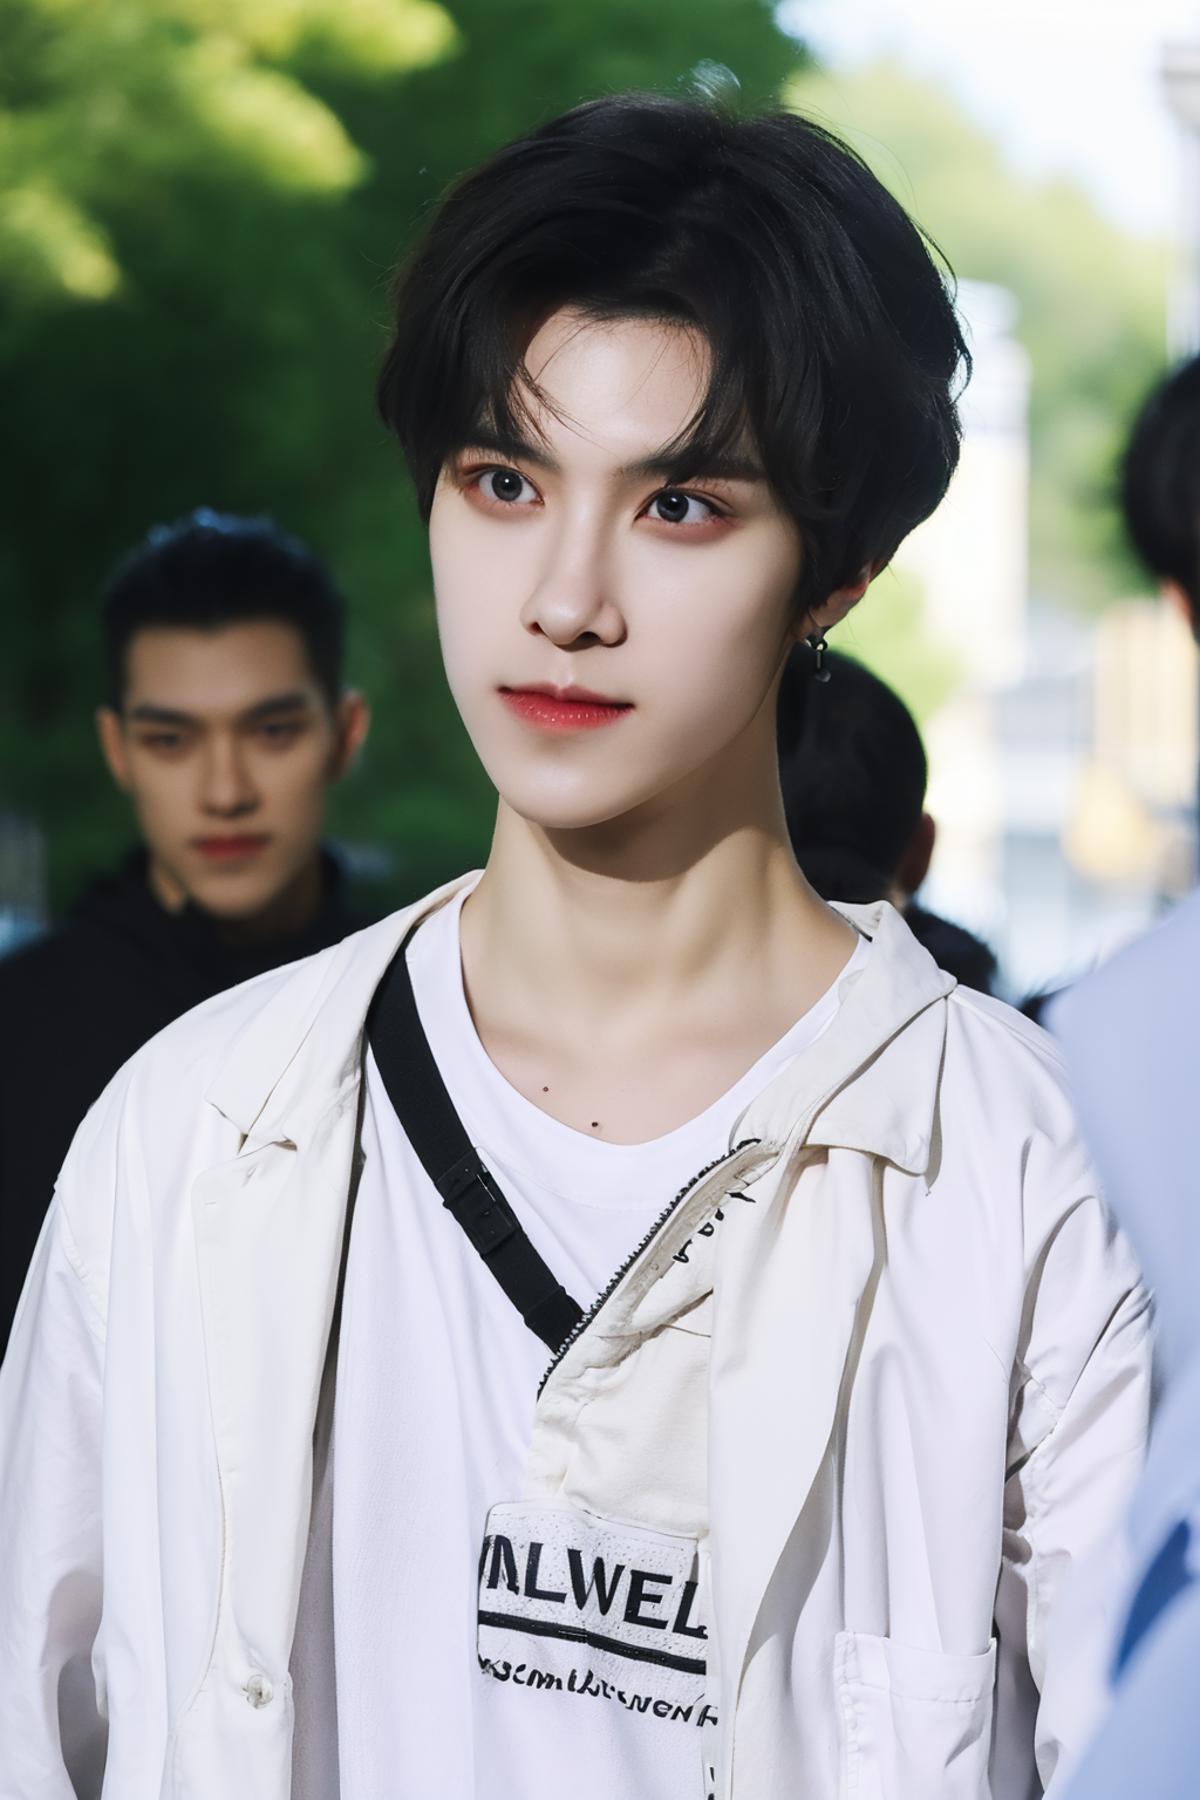 HENDERY image by whythousand